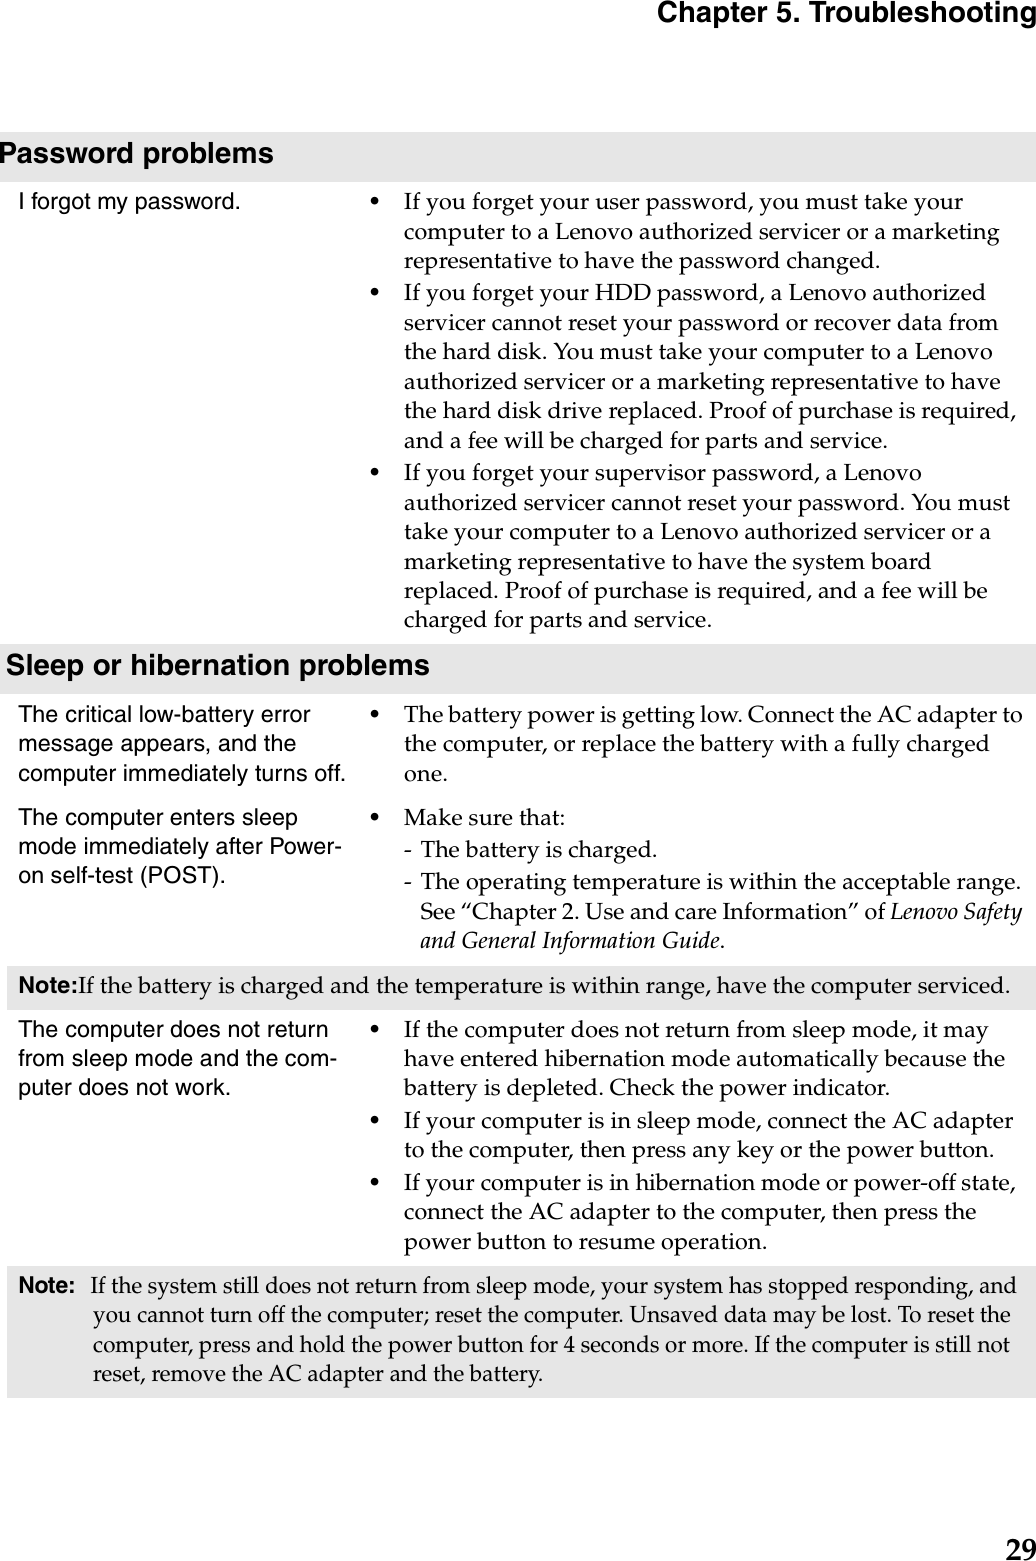 Chapter 5. Troubleshooting29Password problemsI forgot my password. •If you forget your user password, you must take your computer to a Lenovo authorized servicer or a marketing representative to have the password changed. •If you forget your HDD password, a Lenovo authorized servicer cannot reset your password or recover data from the hard disk. You must take your computer to a Lenovo authorized servicer or a marketing representative to have the hard disk drive replaced. Proof of purchase is required, and a fee will be charged for parts and service. •If you forget your supervisor password, a Lenovo authorized servicer cannot reset your password. You must take your computer to a Lenovo authorized servicer or a marketing representative to have the system board replaced. Proof of purchase is required, and a fee will be charged for parts and service. Sleep or hibernation problemsThe critical low-battery error message appears, and the computer immediately turns off.•The battery power is getting low. Connect the AC adapter to the computer, or replace the battery with a fully charged one.The computer enters sleep mode immediately after Power-on self-test (POST). •Make sure that: - The battery is charged.- The operating temperature is within the acceptable range. See “Chapter 2. Use and care Information” of Lenovo Safety and General Information Guide.Note:If the battery is charged and the temperature is within range, have the computer serviced.The computer does not return from sleep mode and the com-puter does not work. •If the computer does not return from sleep mode, it may have entered hibernation mode automatically because the battery is depleted. Check the power indicator. •If your computer is in sleep mode, connect the AC adapter to the computer, then press any key or the power button.•If your computer is in hibernation mode or power-off state, connect the AC adapter to the computer, then press the power button to resume operation.Note: If the system still does not return from sleep mode, your system has stopped responding, and you cannot turn off the computer; reset the computer. Unsaved data may be lost. To reset the computer, press and hold the power button for 4 seconds or more. If the computer is still not reset, remove the AC adapter and the battery.